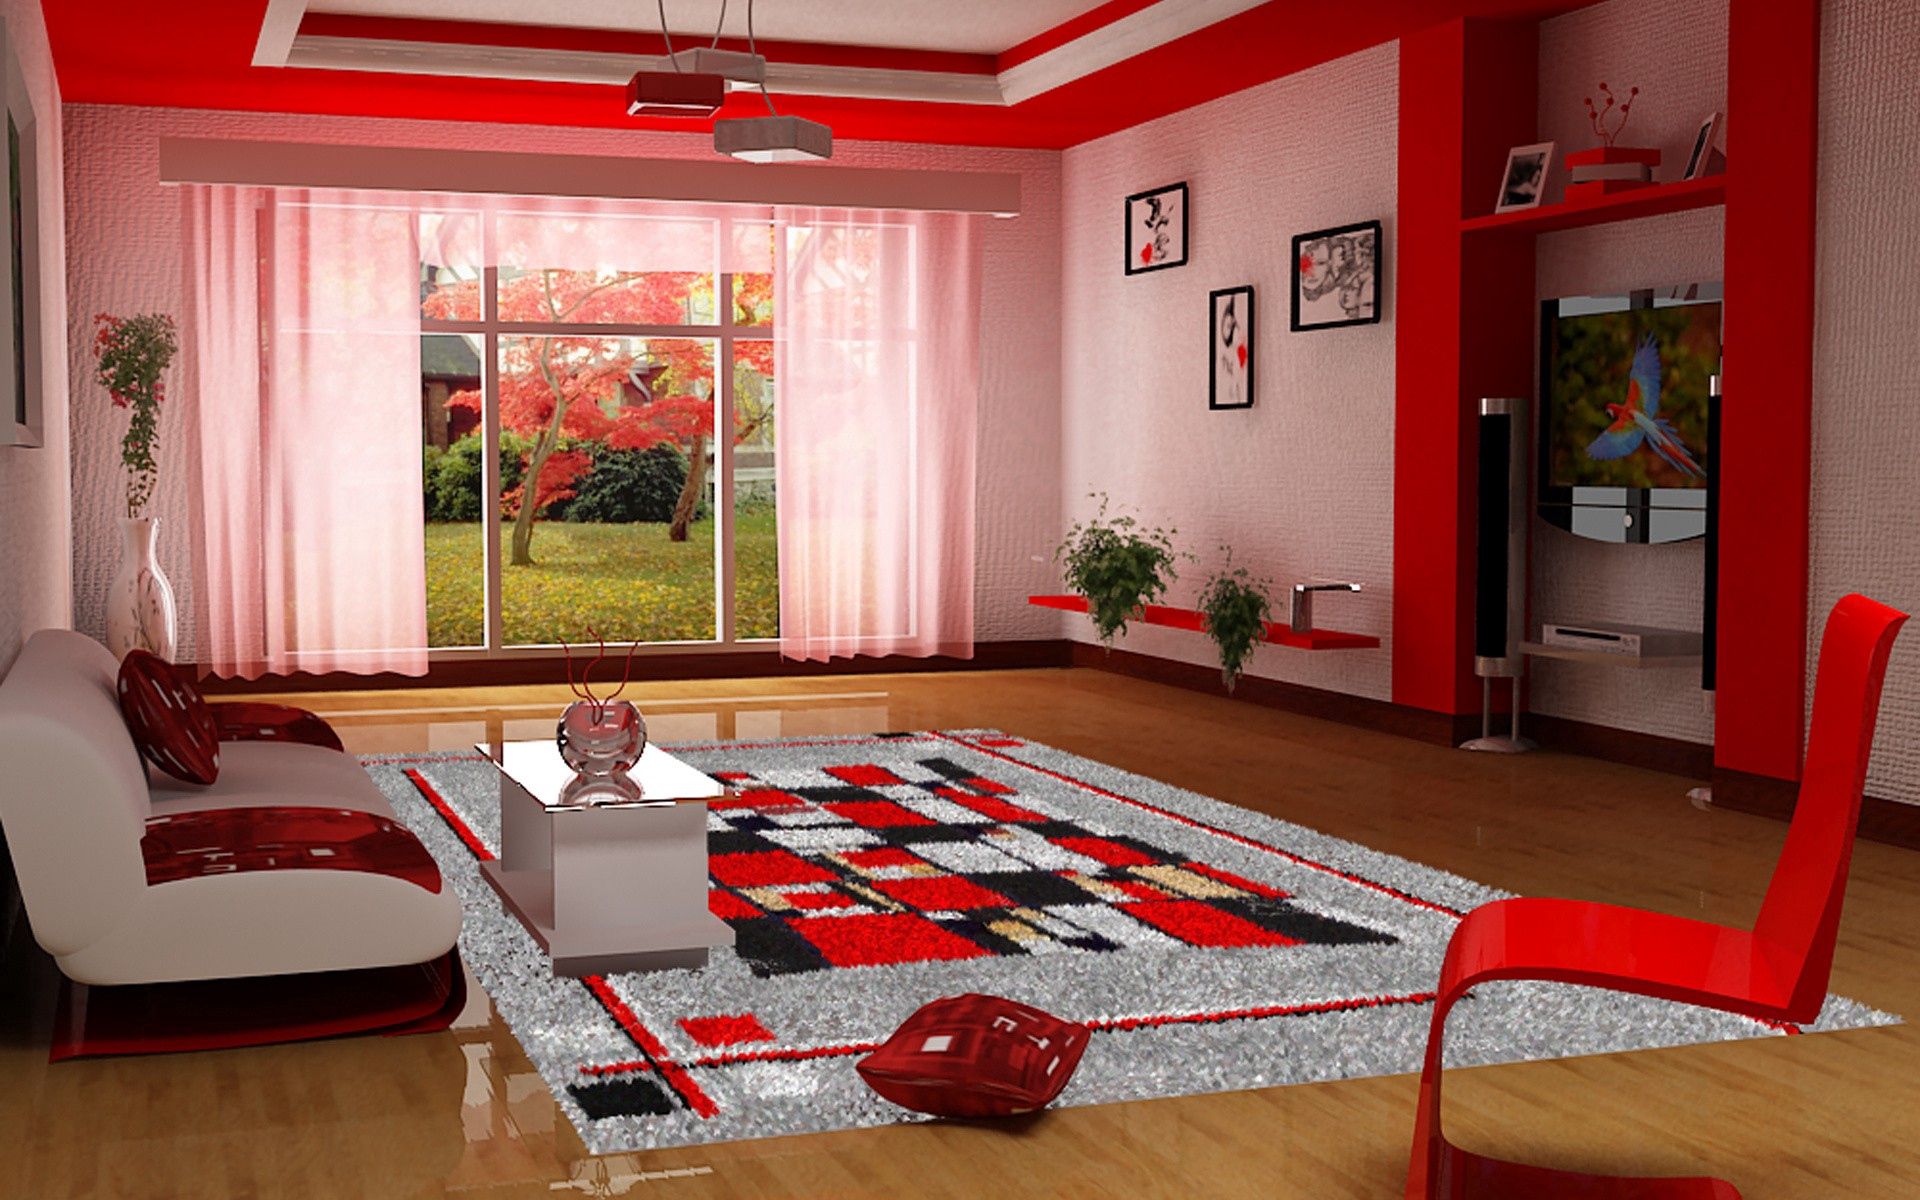 miscellaneous, red, miscellanea, style, furniture, living room